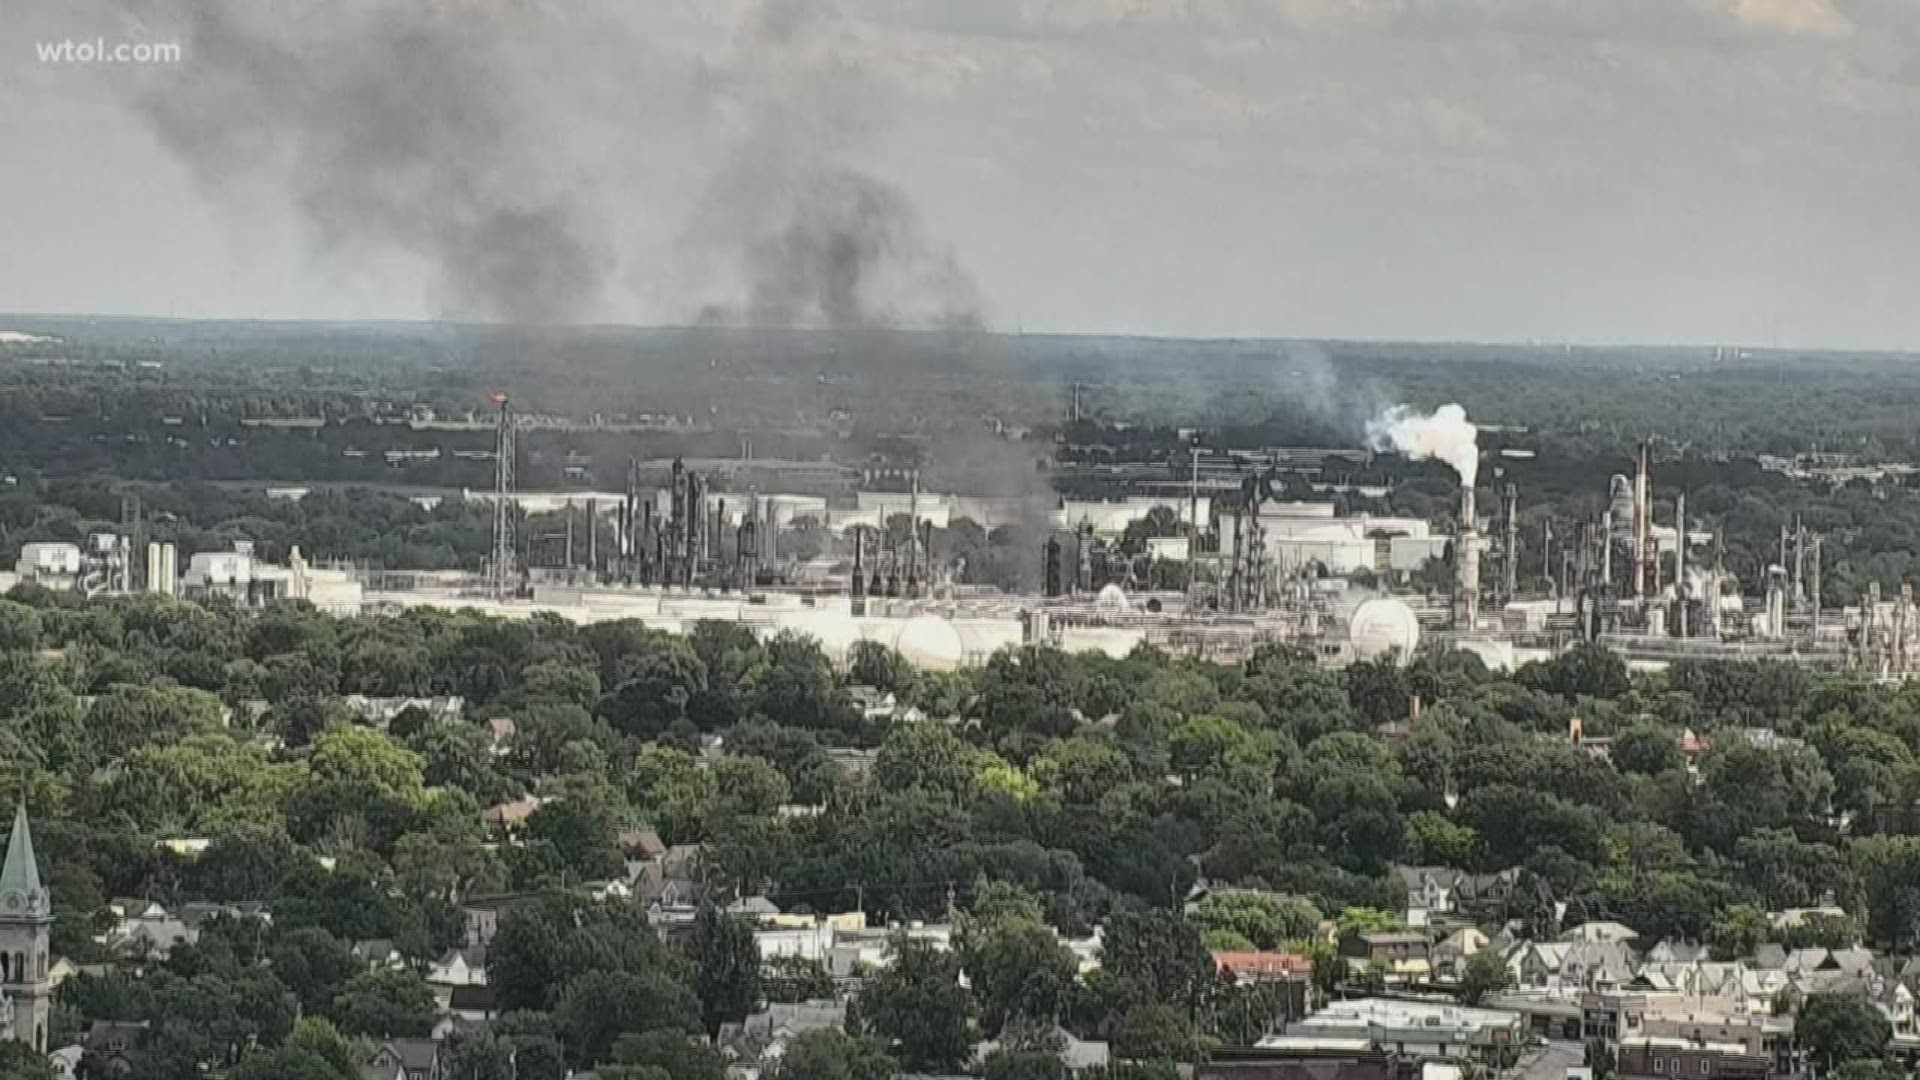 A blaze broke out just after 3 p.m. and was extinguished by 3:31 p.m., a refinery spokesperson said.